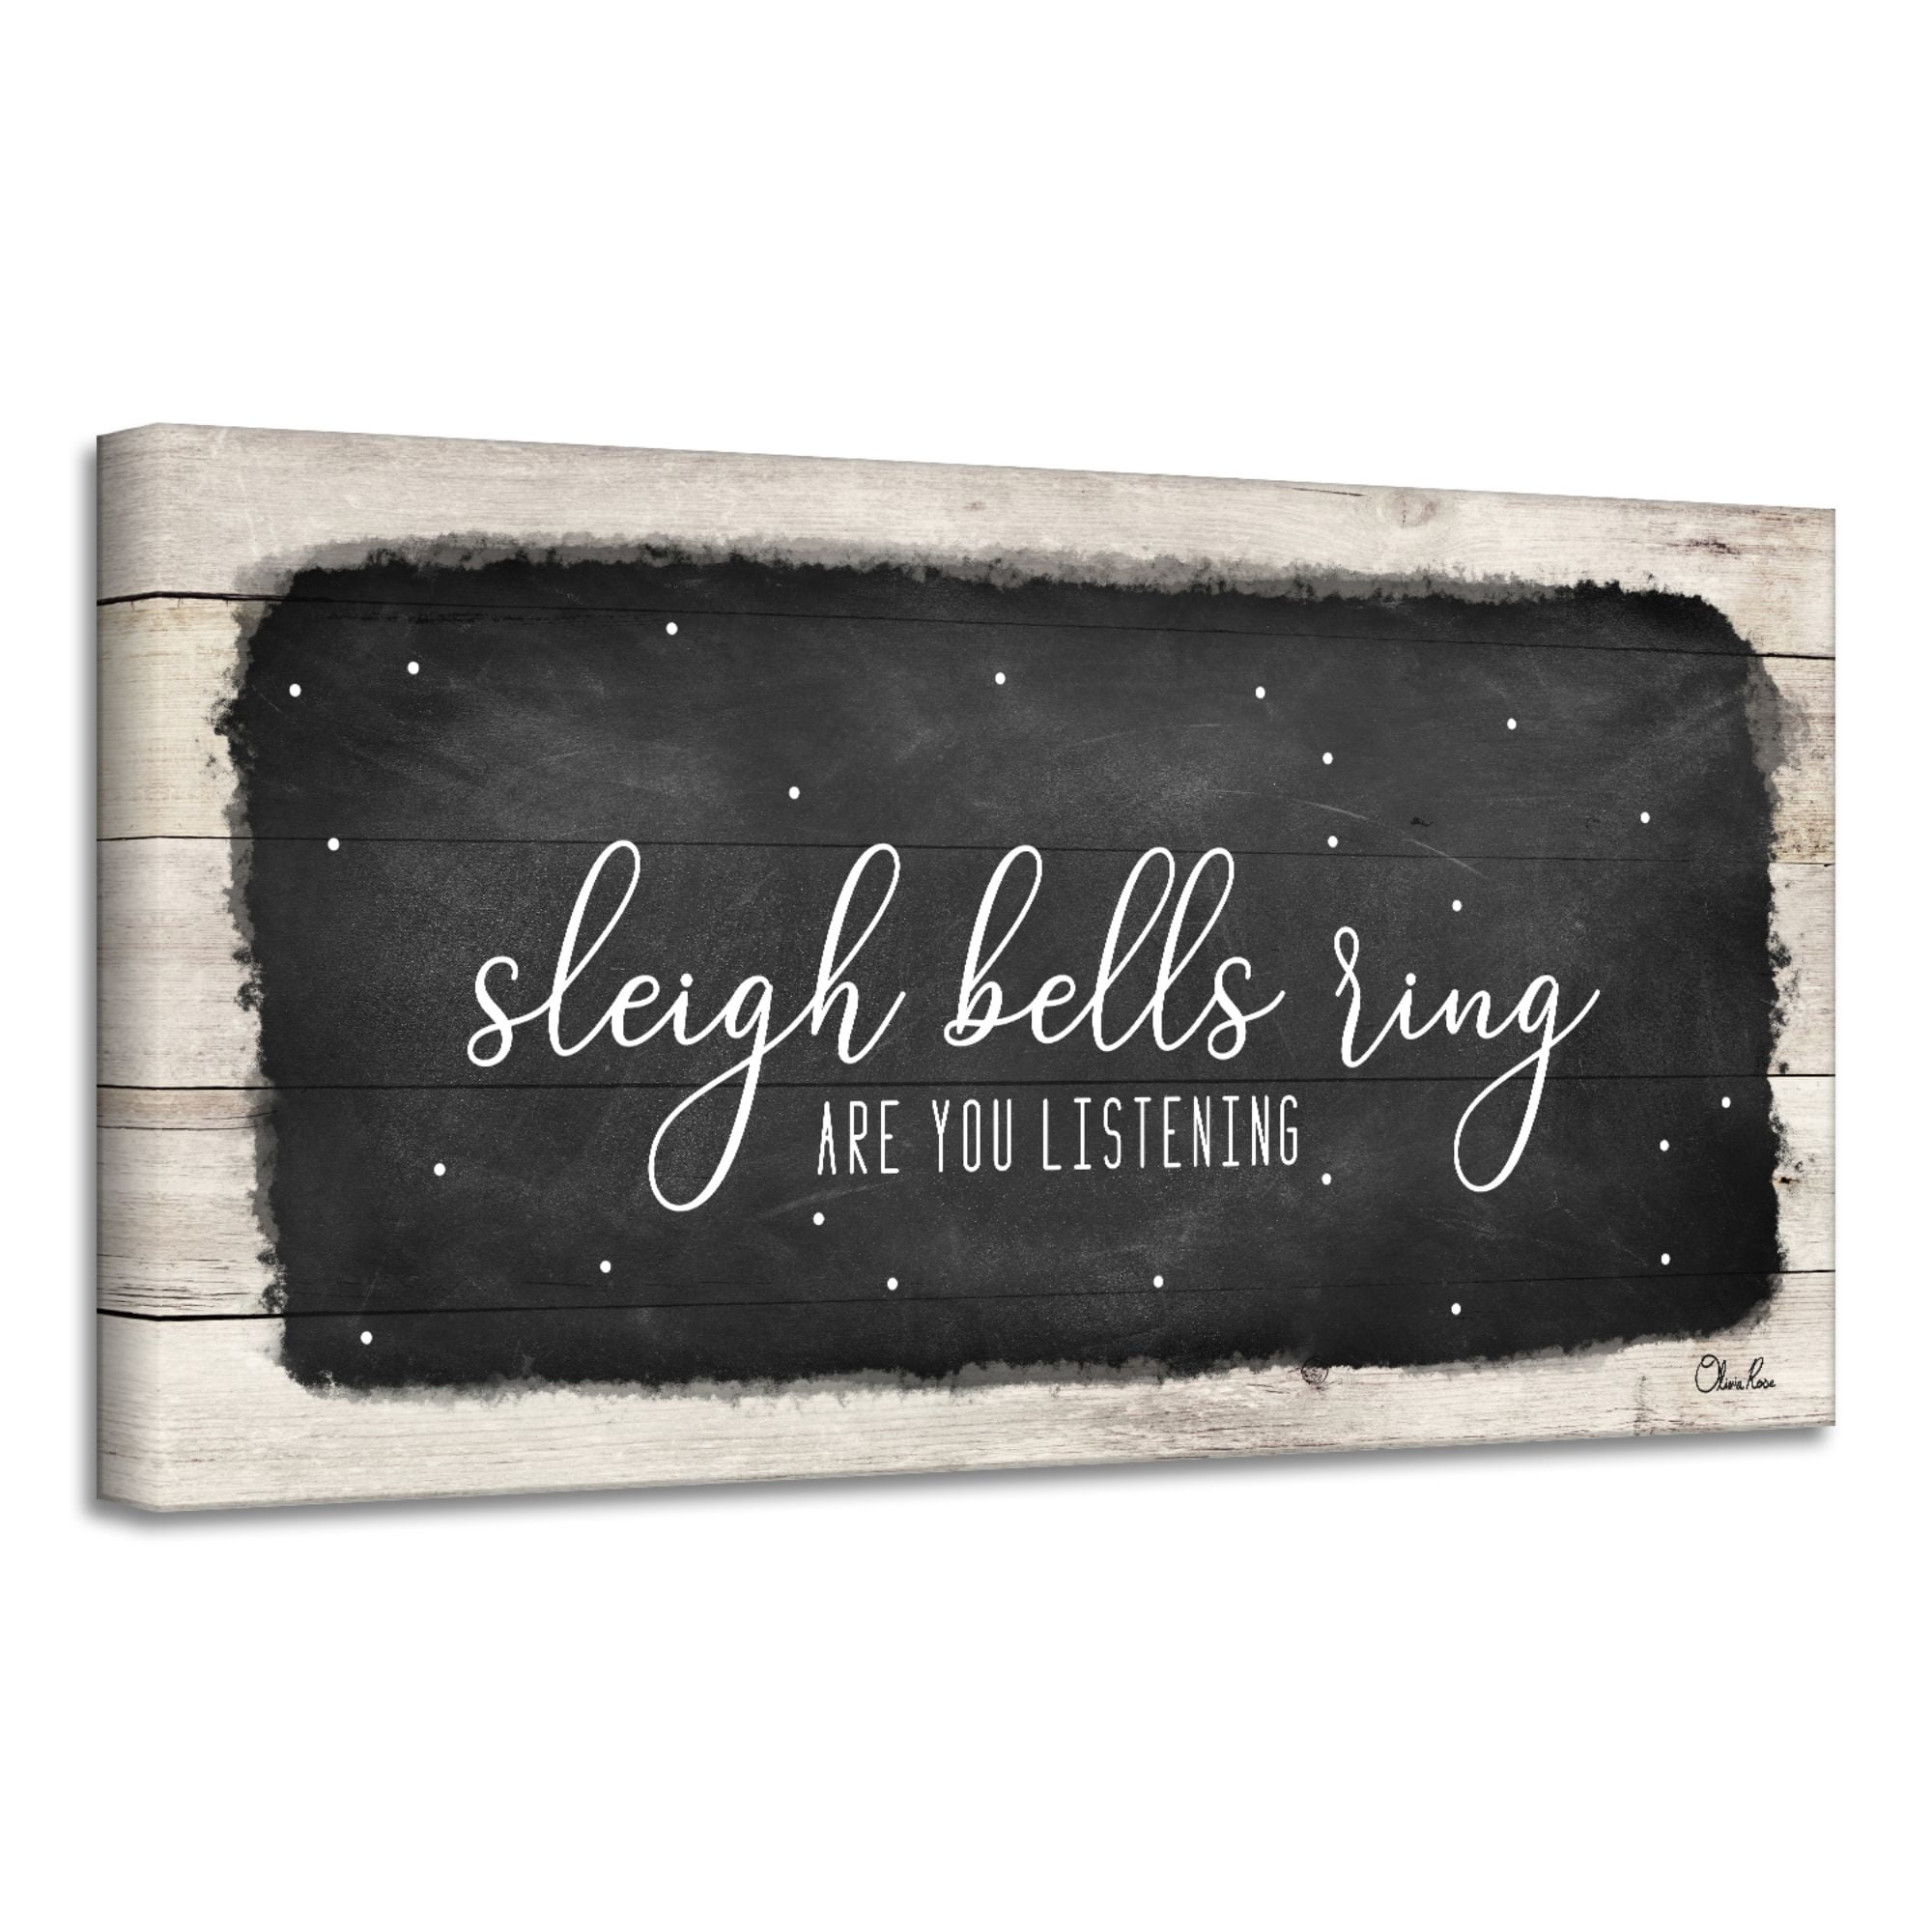 Sleigh Bell Ring Are You Listening 5x7 Print Christmas Decor 5x7 Christmas Print Christmas Wall Decor Merry Christmas Art